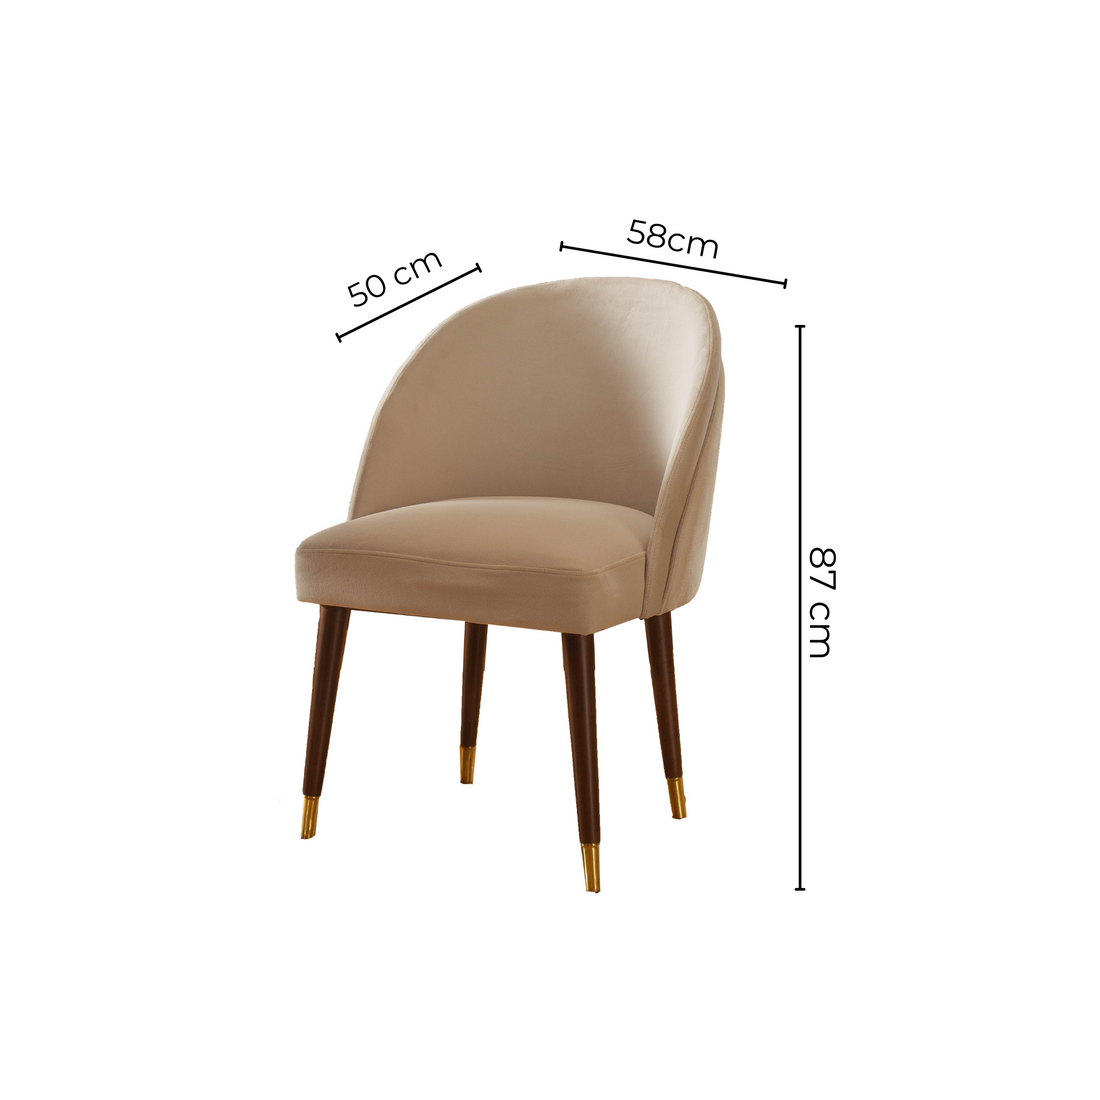 Layer Dinning Chair